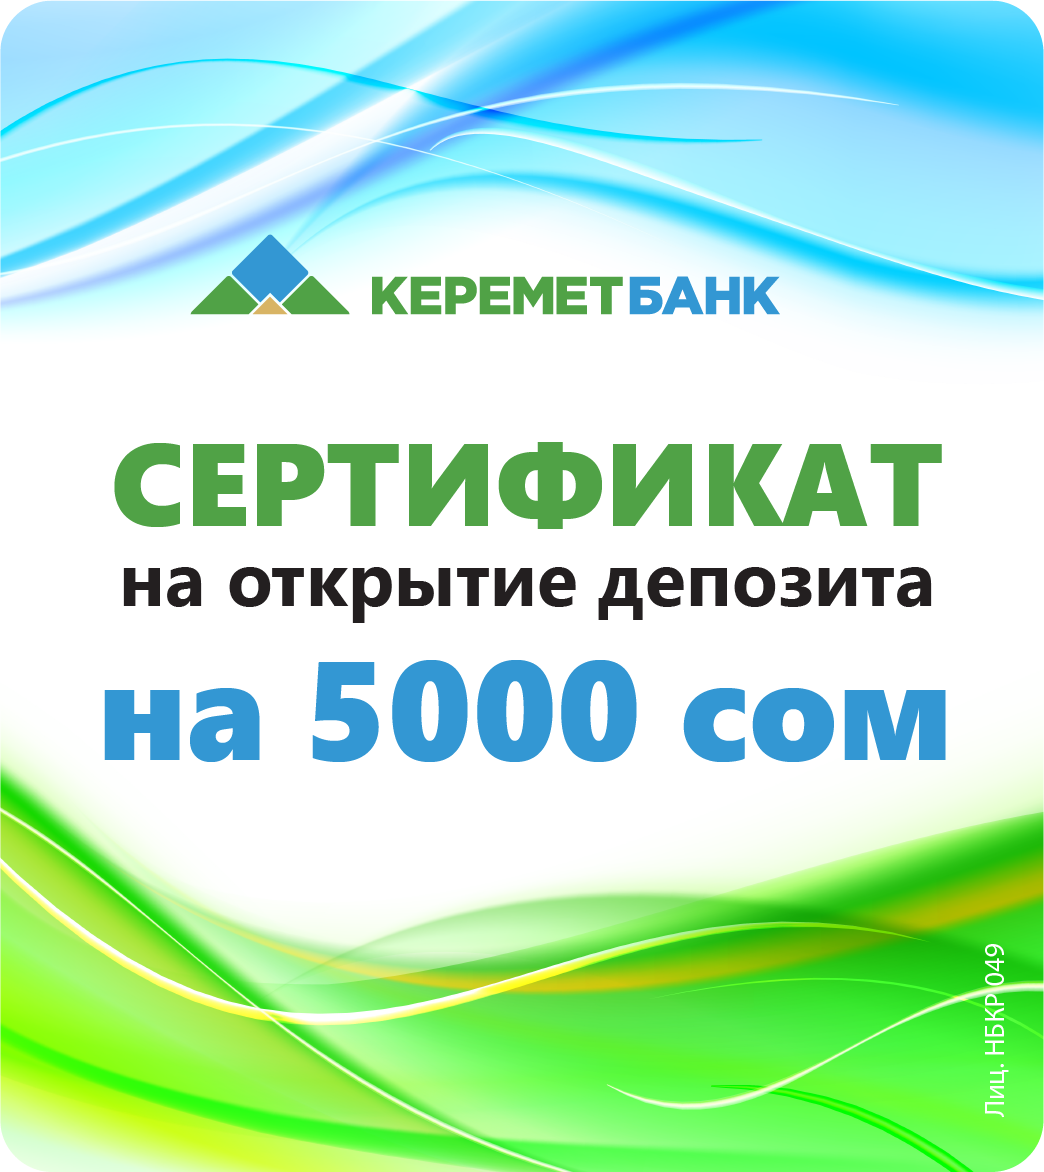 Exchange 50 points for a deposit!